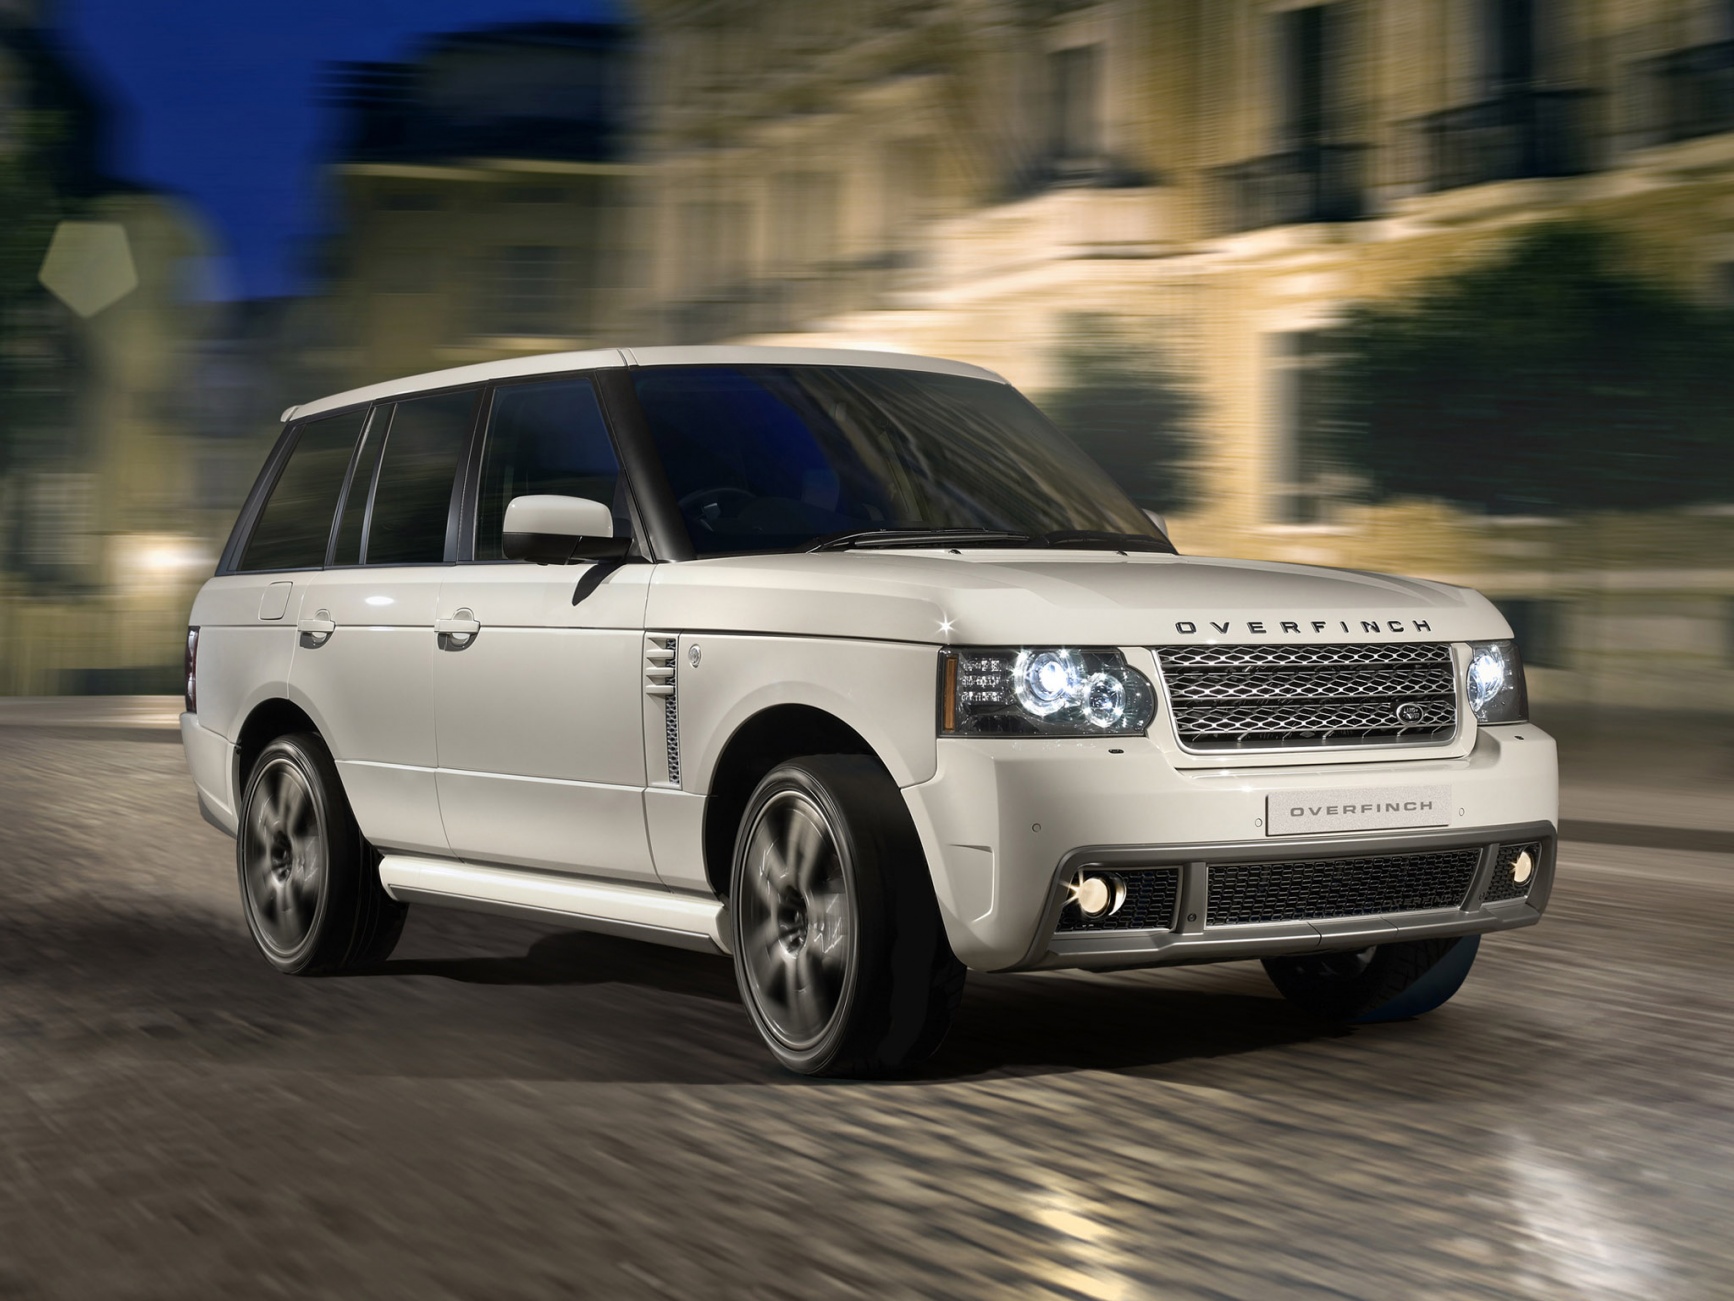 Land Rover Vogue photos PhotoGallery with 3 pics